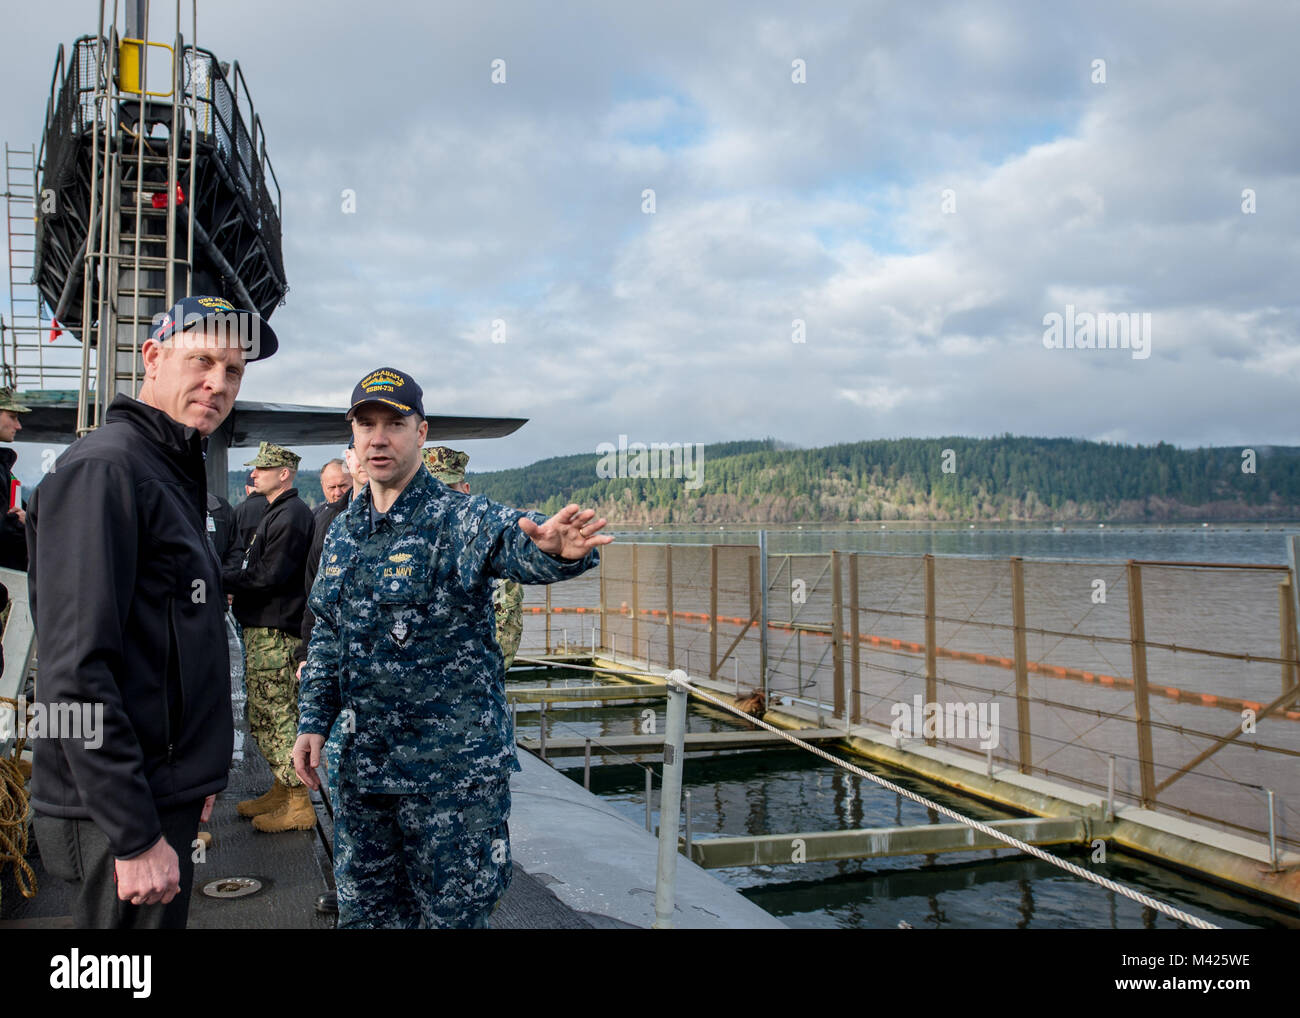 BANGOR, Wash. (Feb. 9, 2018) Cmdr. Jeffery Yackeren, commanding officer USS Alabama (SSBN 731) gives a tour to Deputy Secretary of Defense Patrick M. Shanahan (left). Shanahan also visited Commander, Submarine Group 9 and other facilities onboard Naval Base Kistap-Bangor,  Washington highlighting the strategic deterrence mission. Alabama is one of eight ballistic-missile submarines stationed at the base, providing the most survivable leg of the strategic deterrence triad for the United States. (U.S. Navy photo by Mass Communication Specialist 2nd Class Nancy C. diBenedetto/Released) Stock Photo